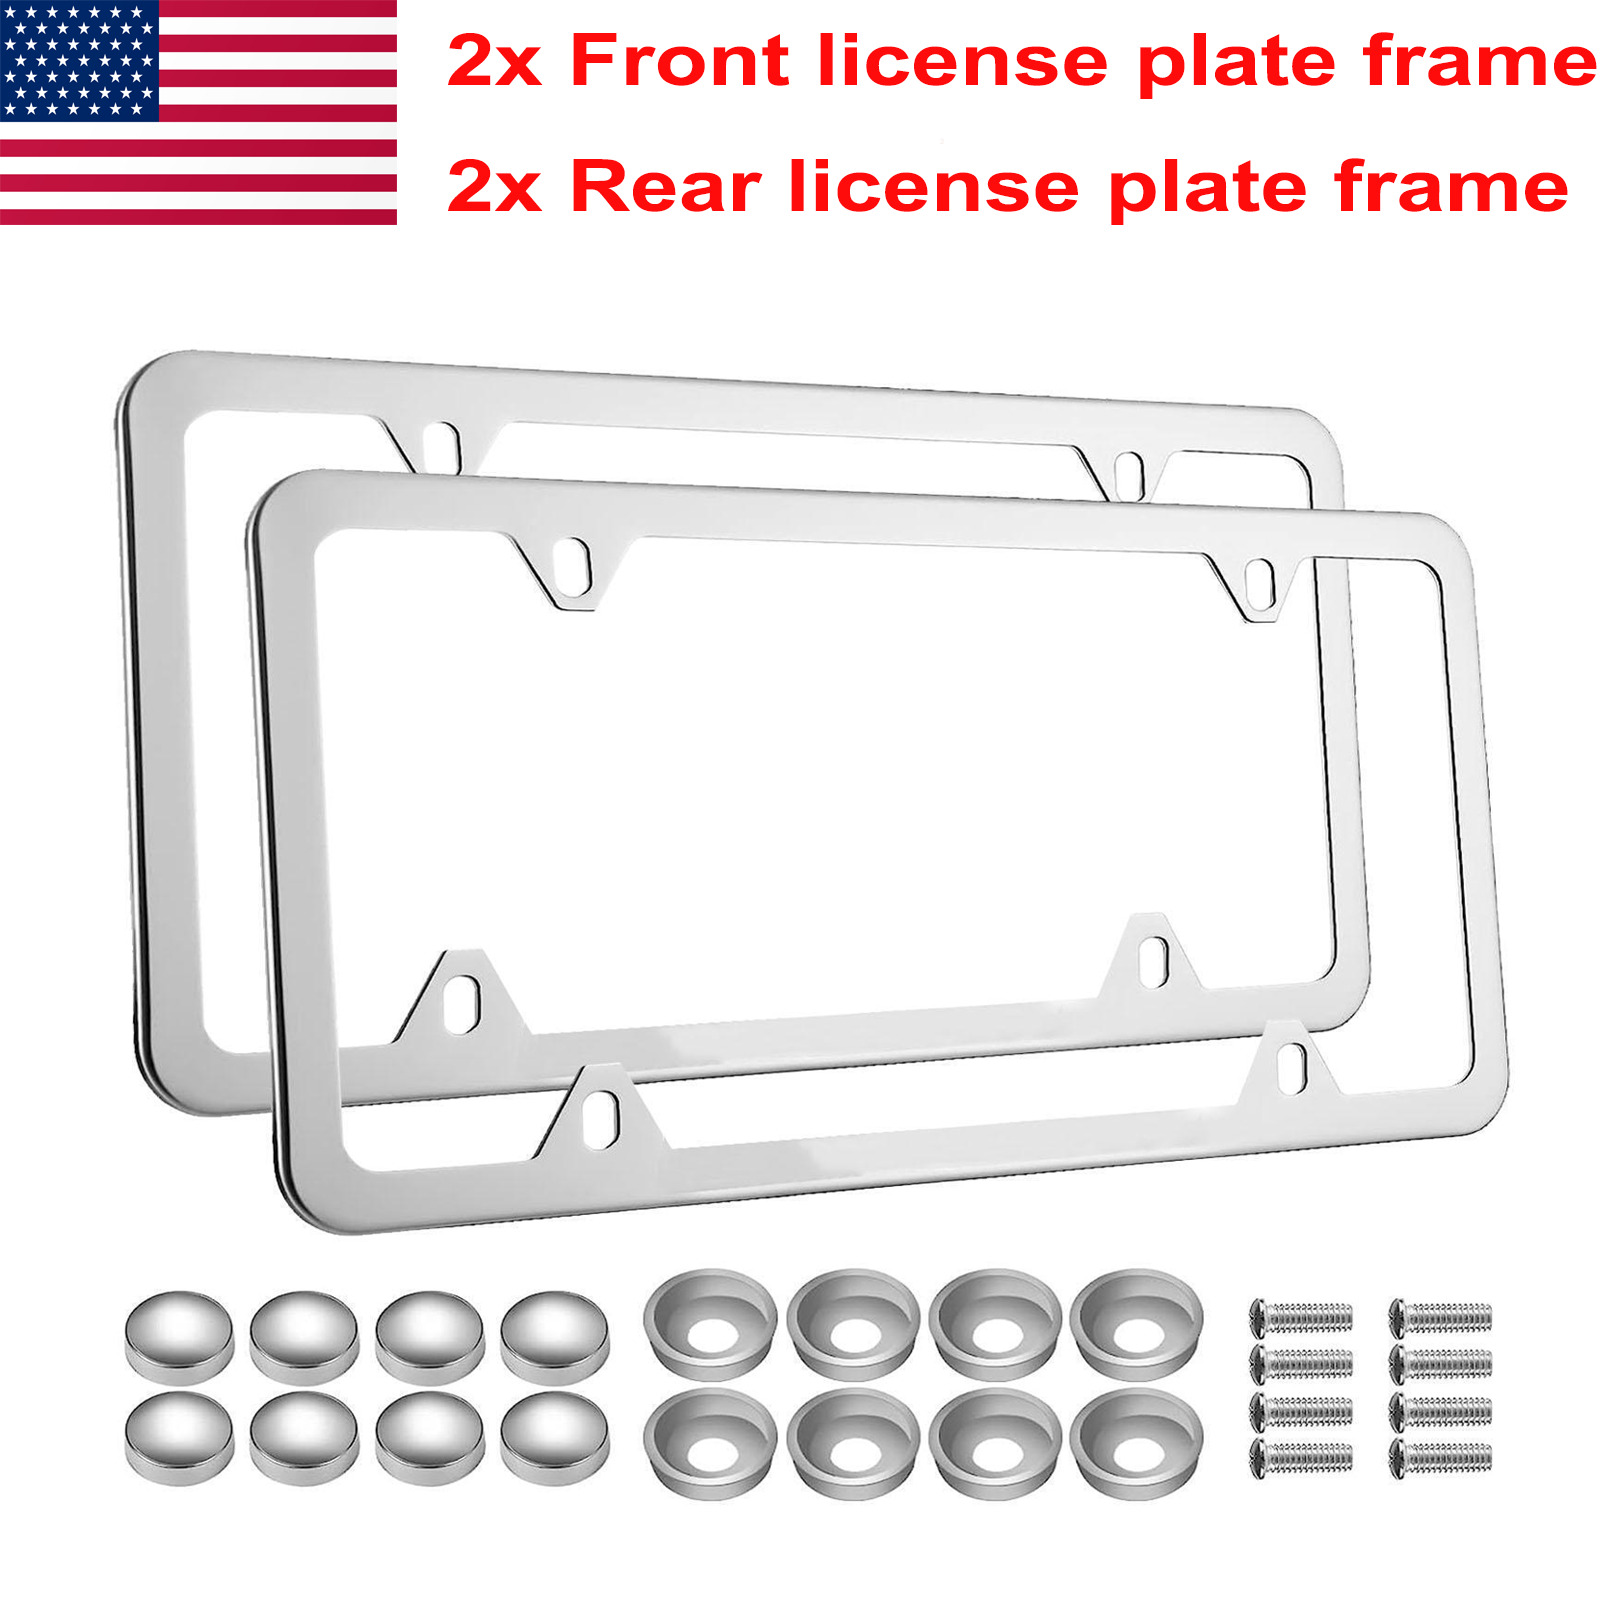 4Pcs Chrome Stainless Steel Metal License Plate Frame Tag Cover With Screw Caps